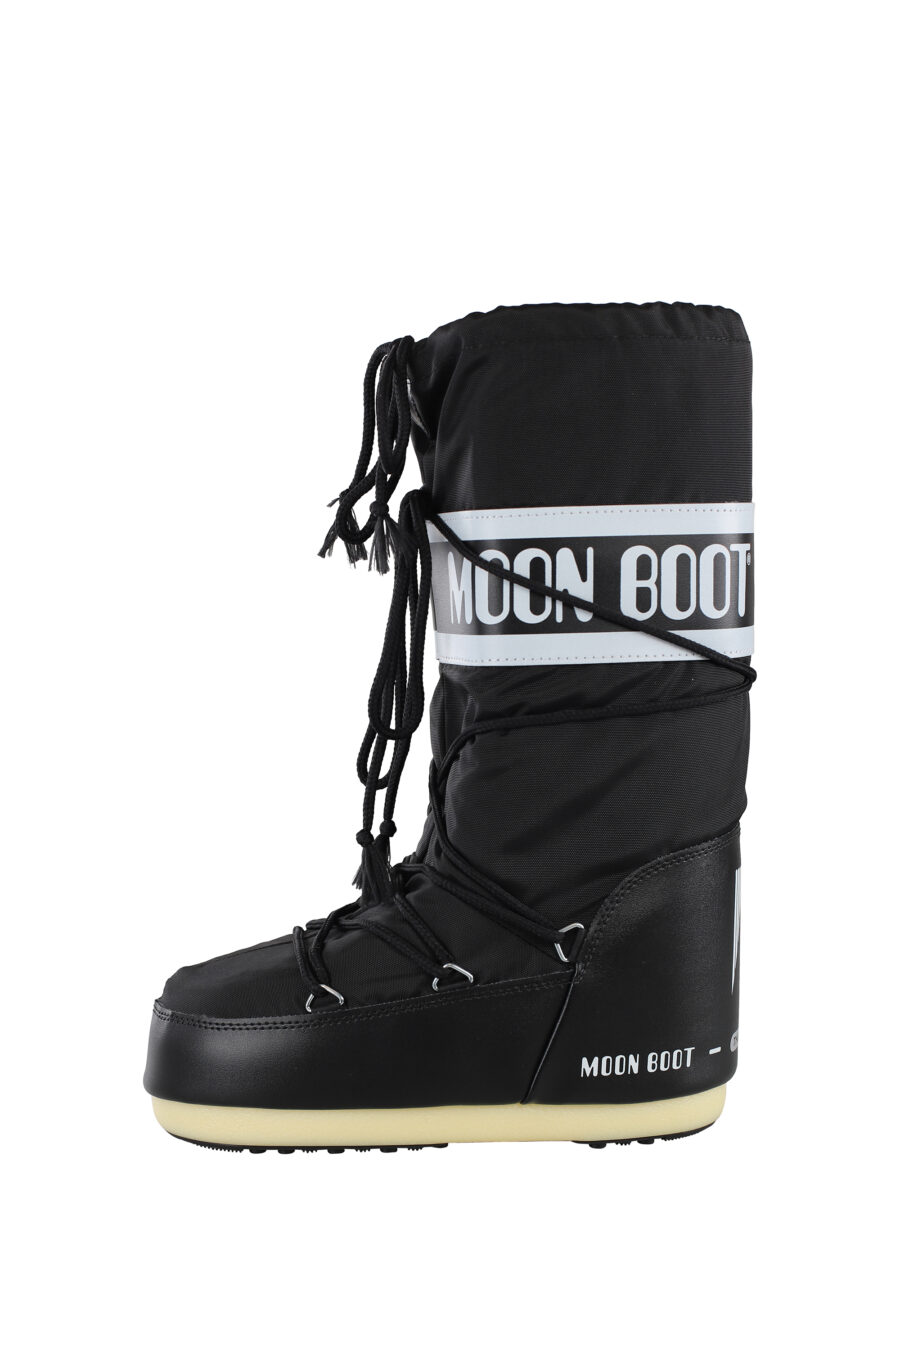 Black snow boots with white logo on ribbon - IMG 6799